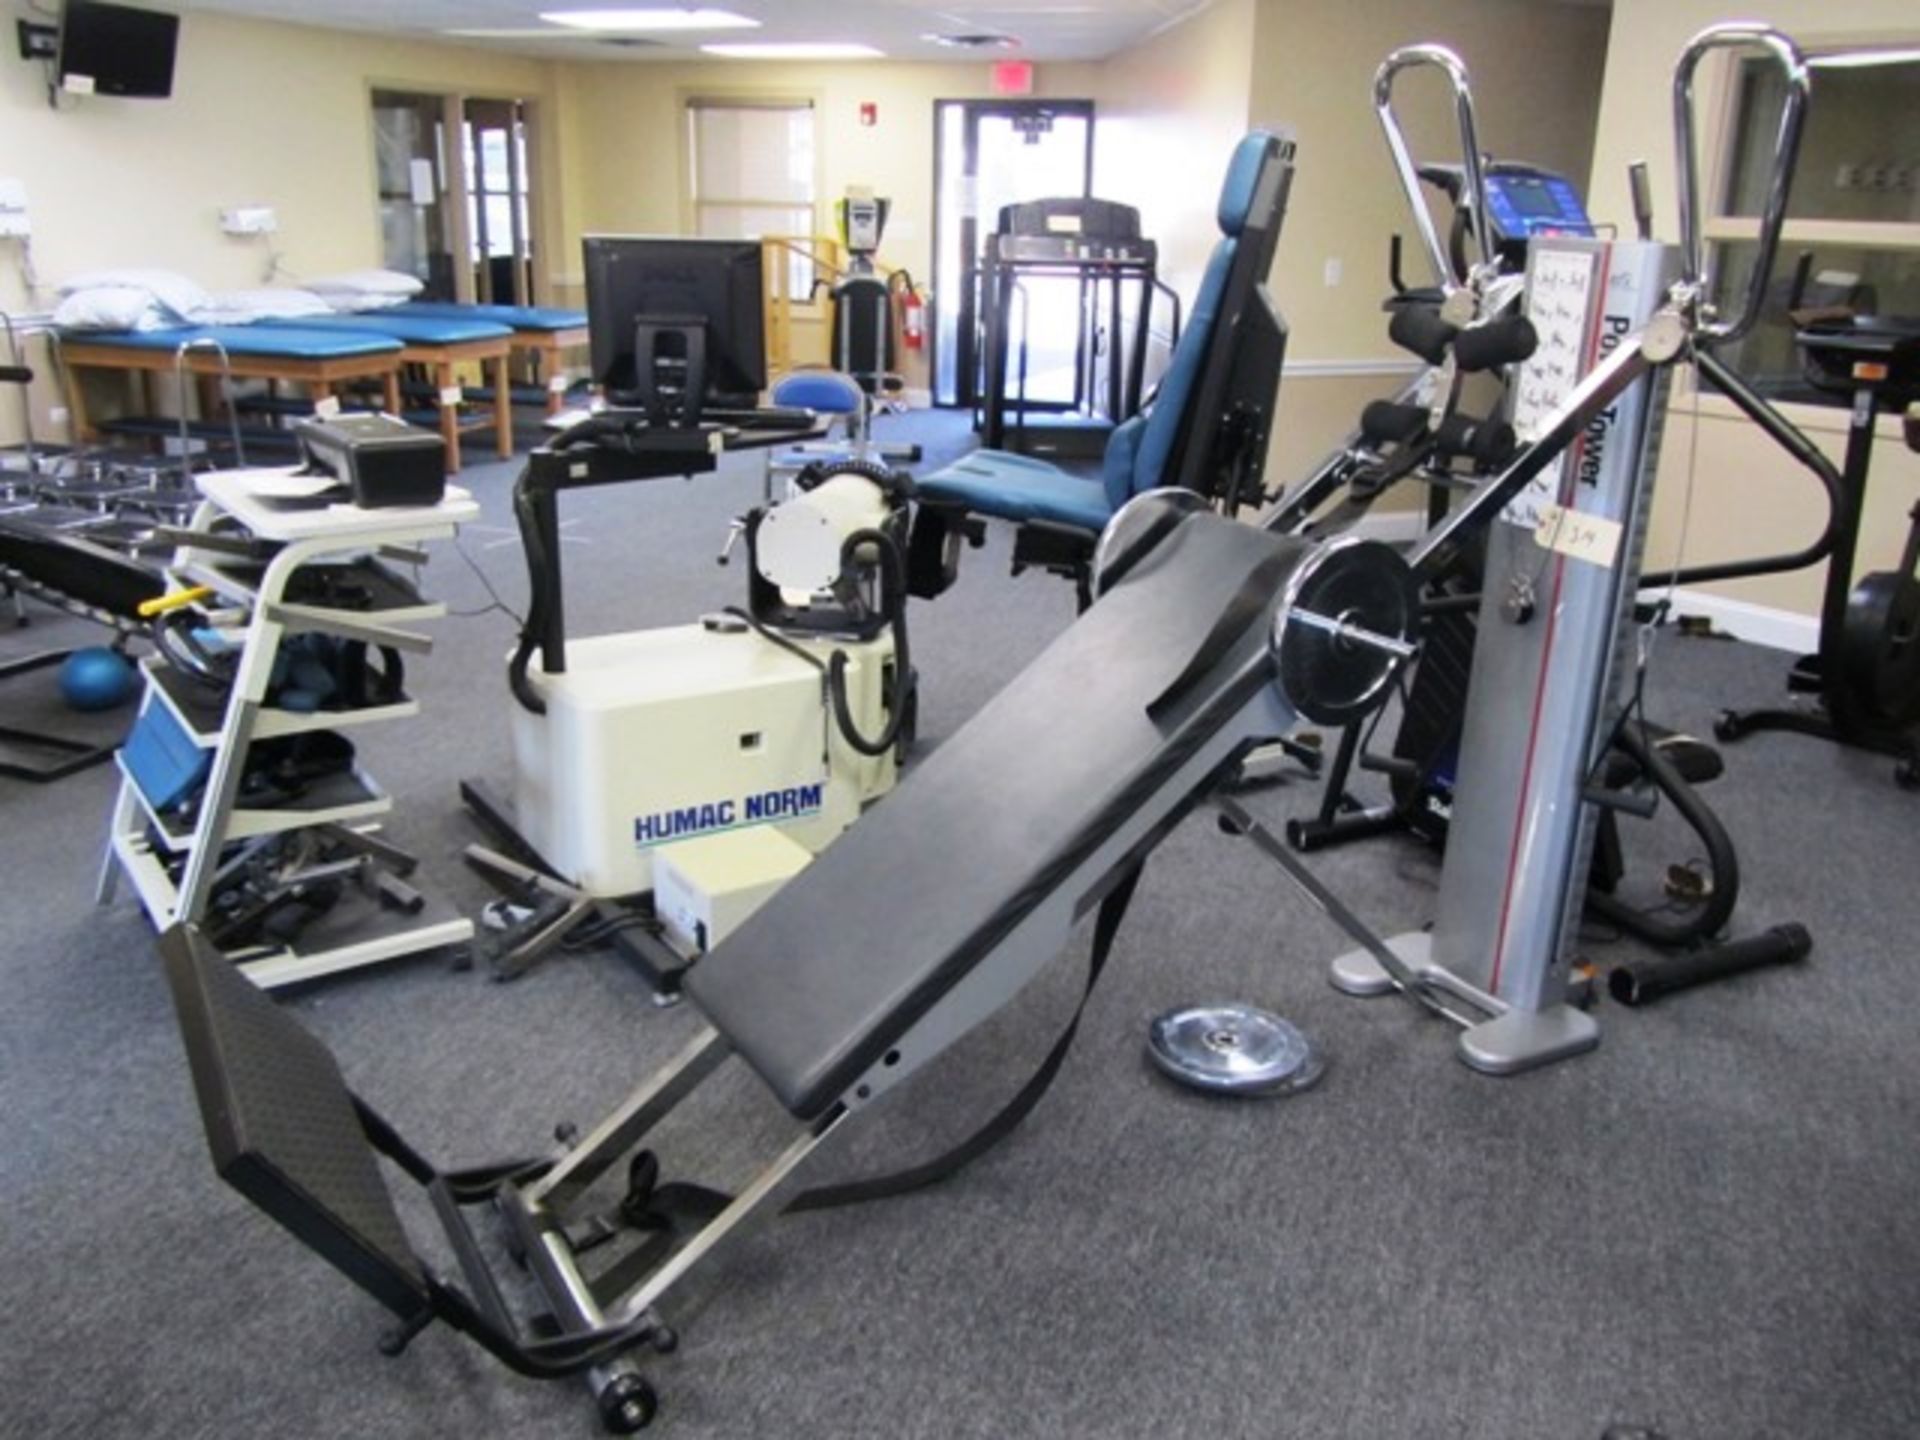 EFI Power Tower Model 6006-1 Gravity Exercise Machine, sn:1021*located Orland Park, IL